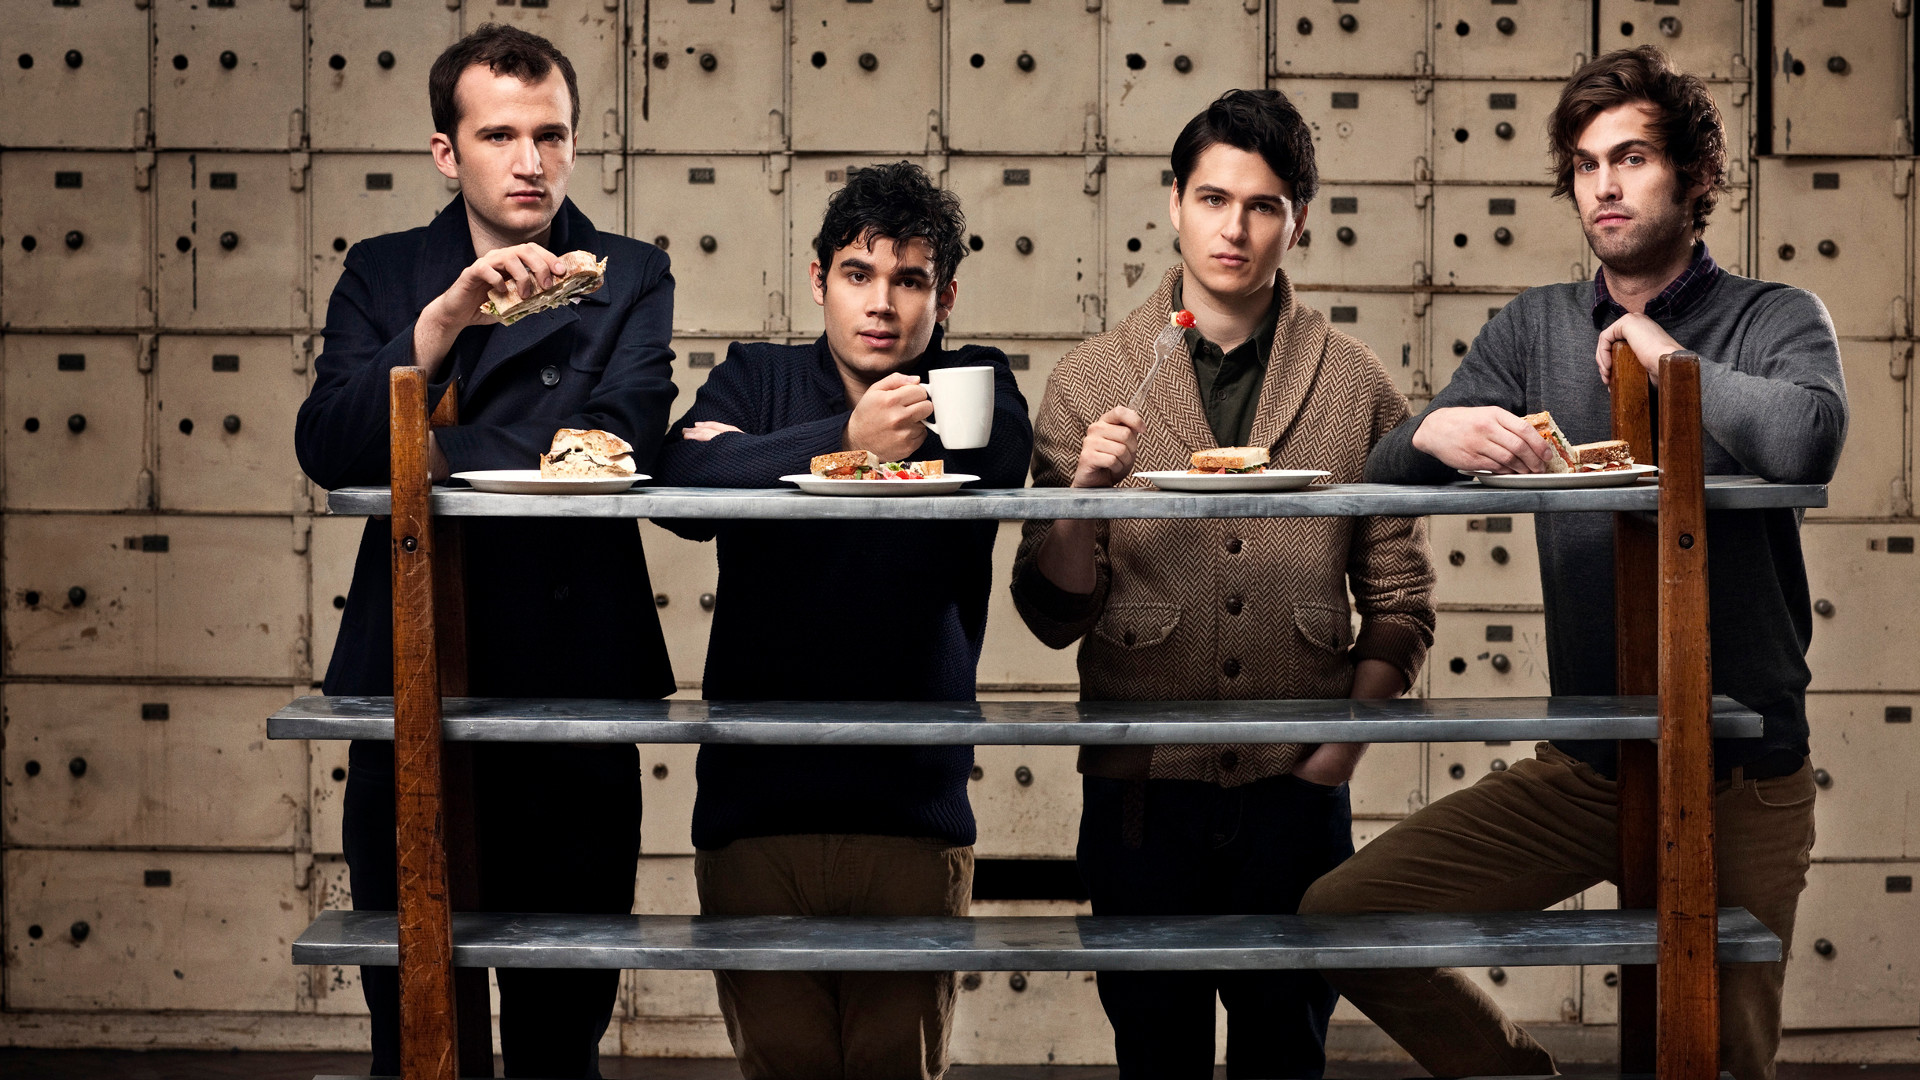 Vampire Weekend Backgrounds, Compatible - PC, Mobile, Gadgets| 1920x1080 px